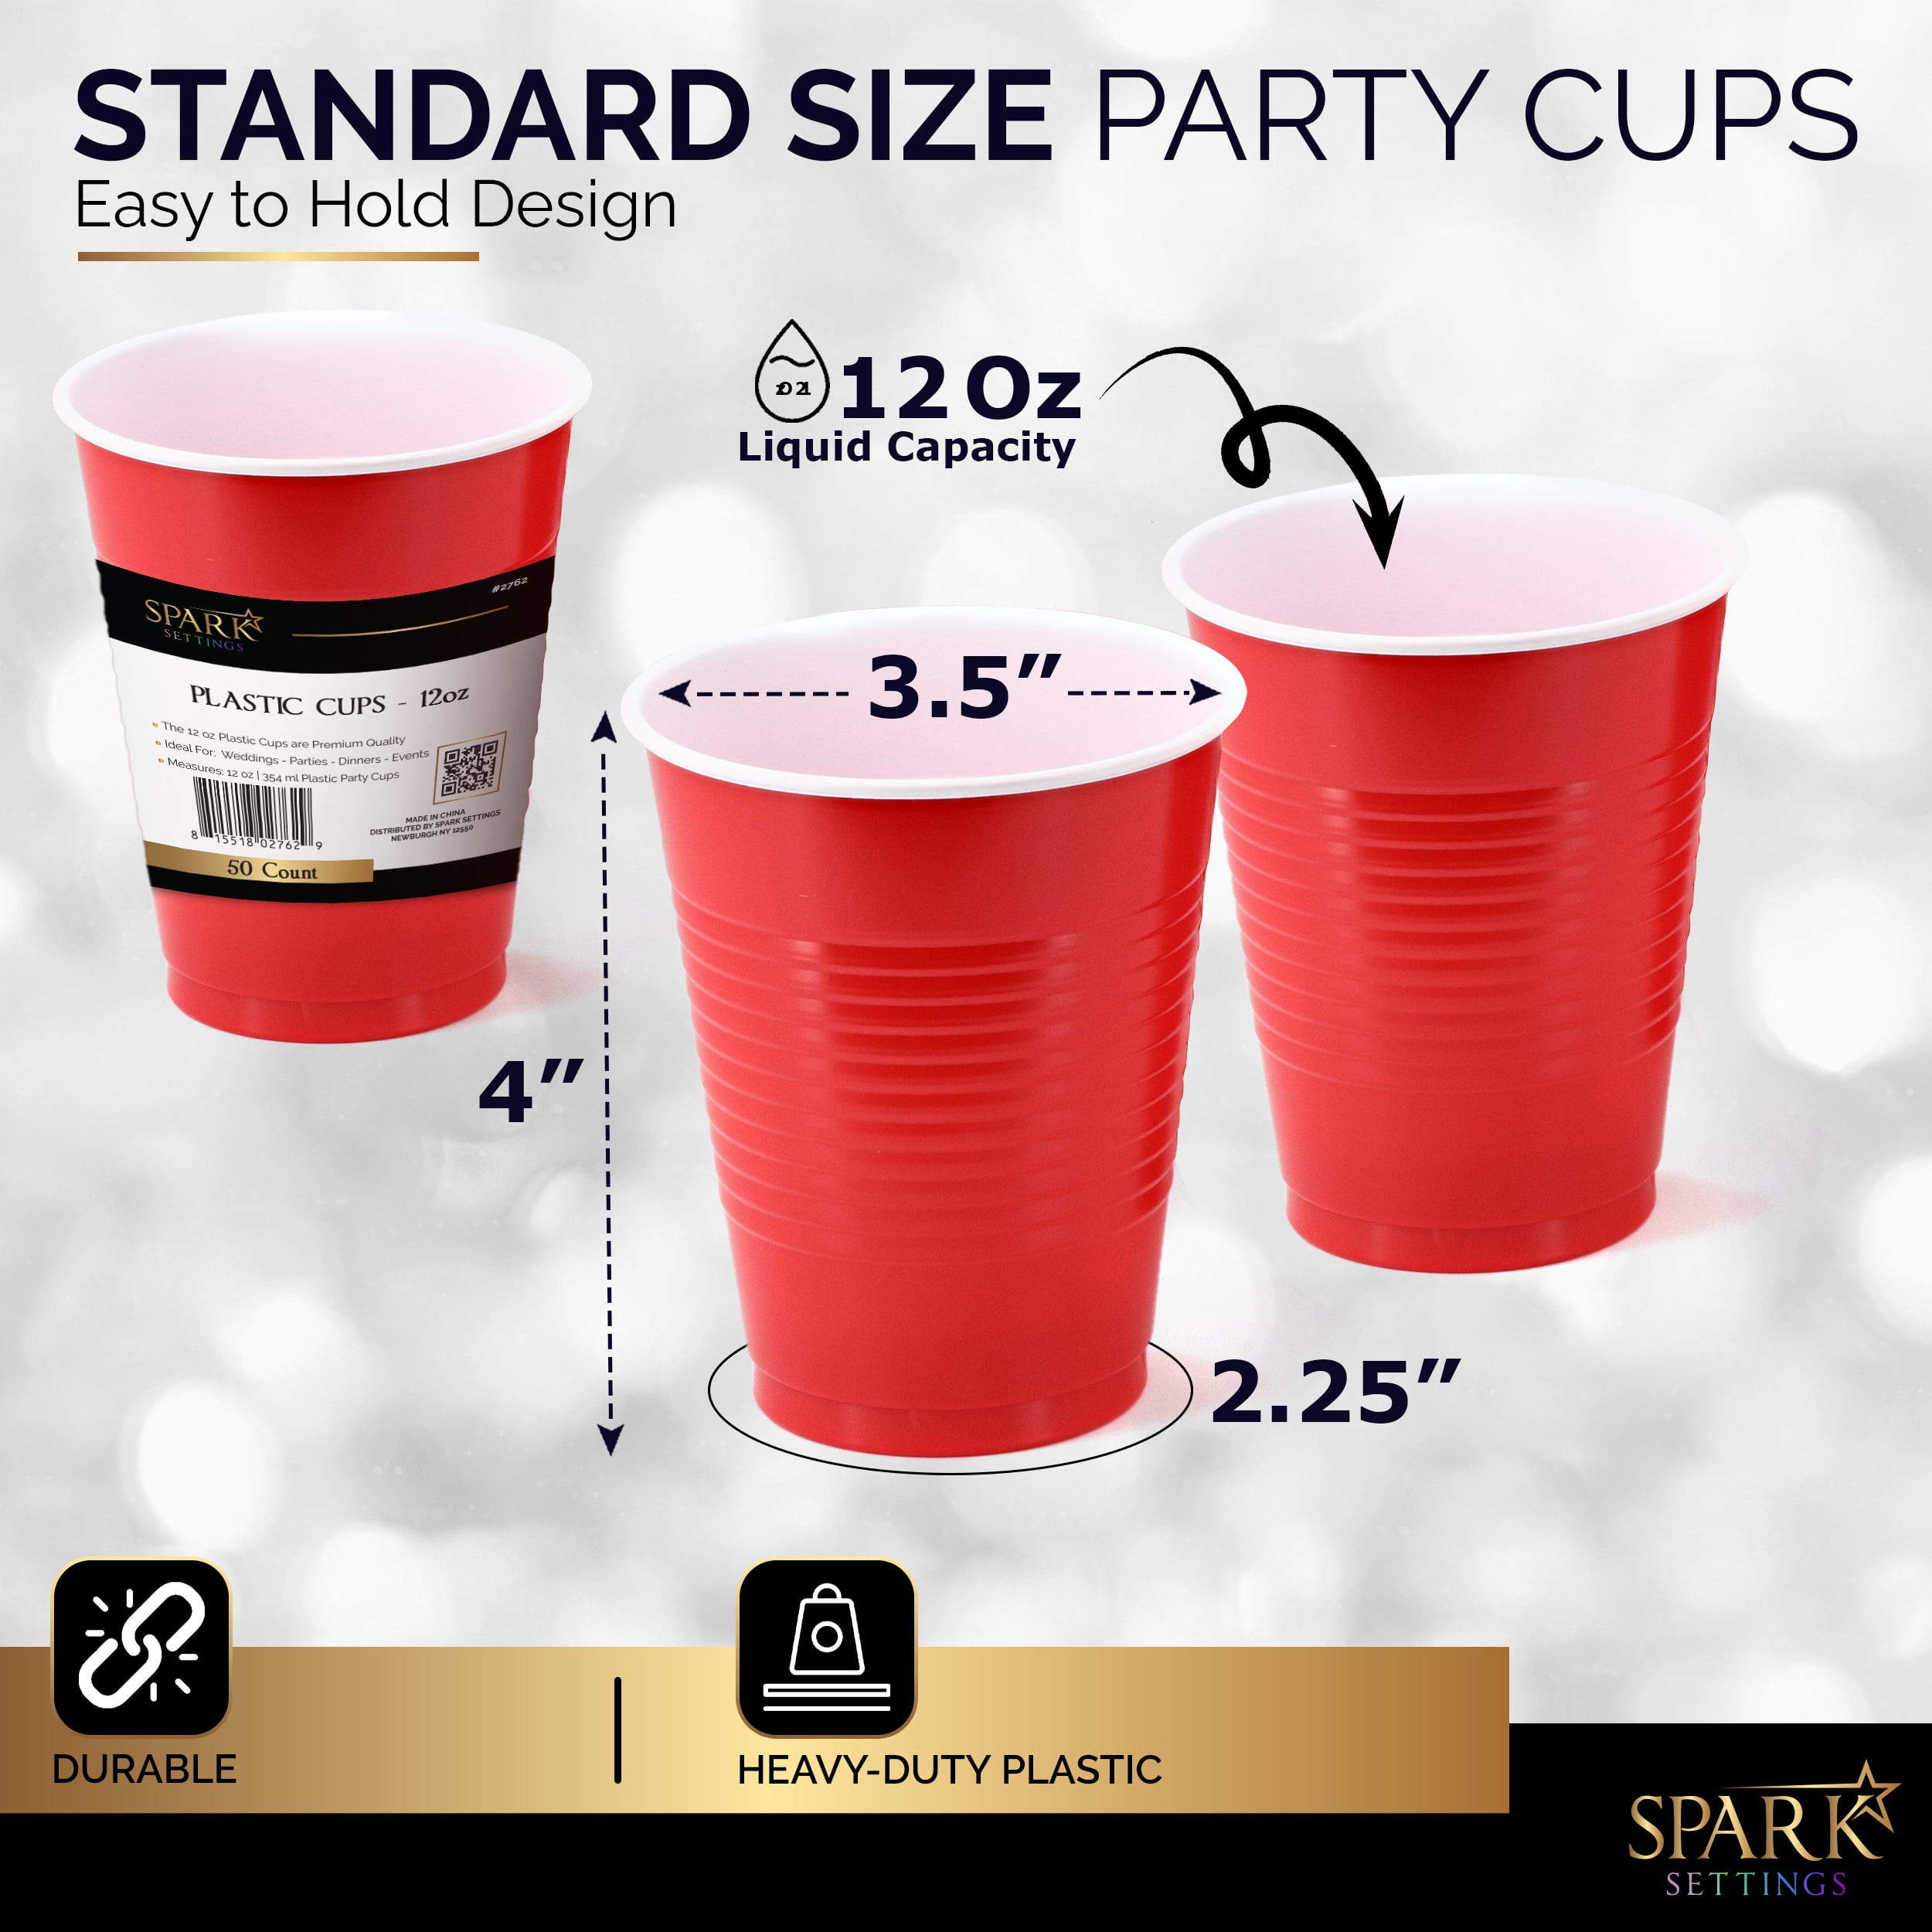 Exquisite 12 Ounce Disposable Red Plastic Cups-50 Count